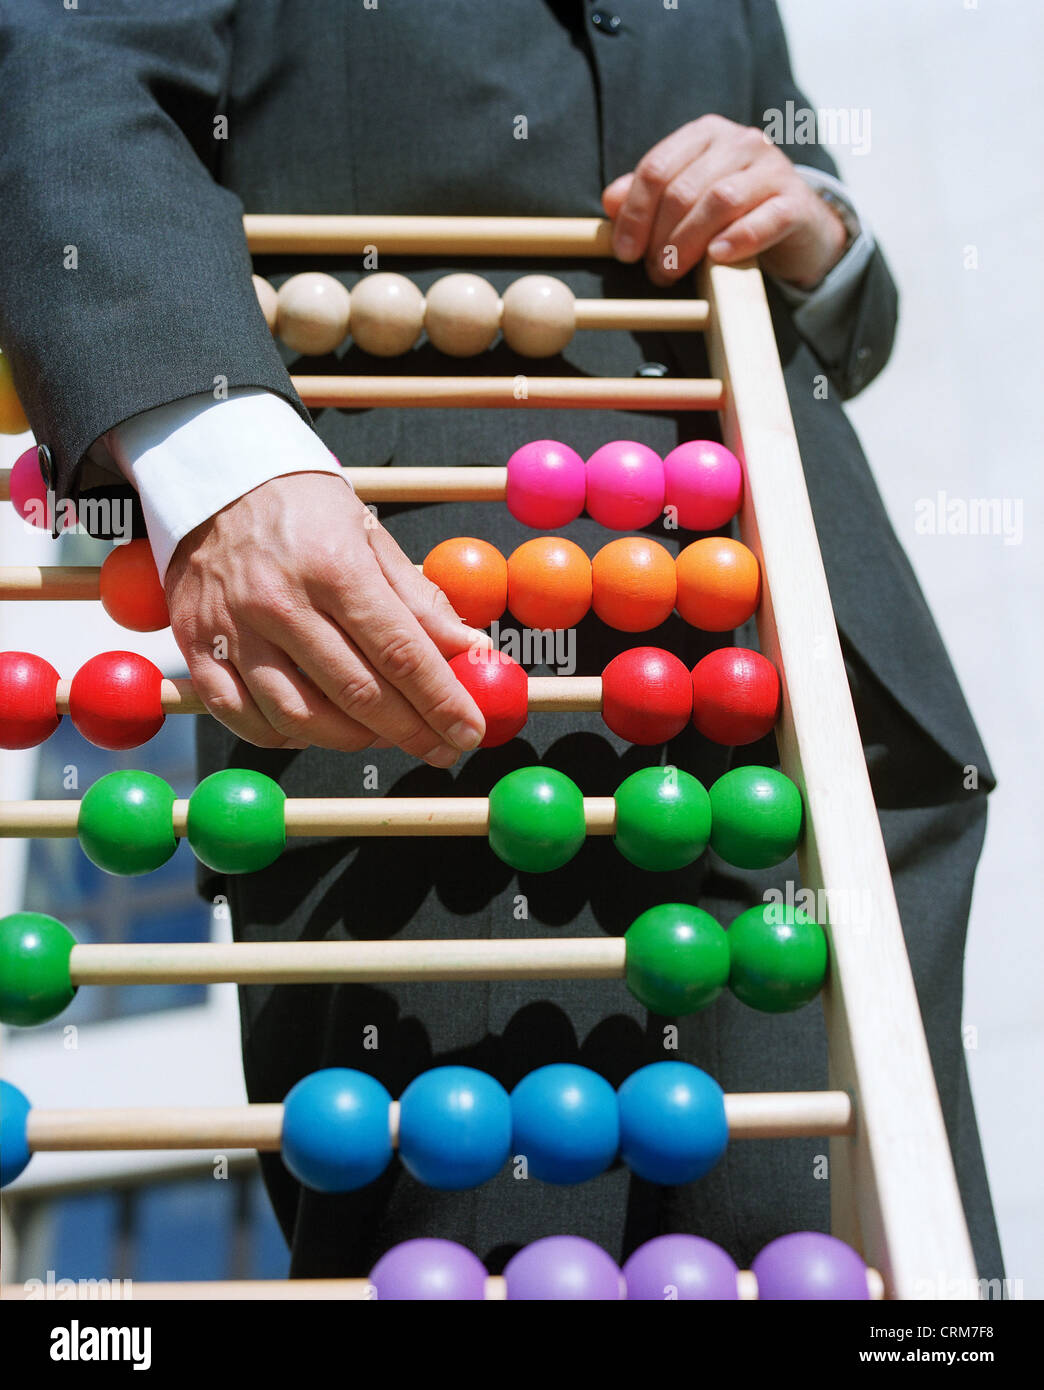 Man in a dark suit moved balls on an abacus Stock Photo